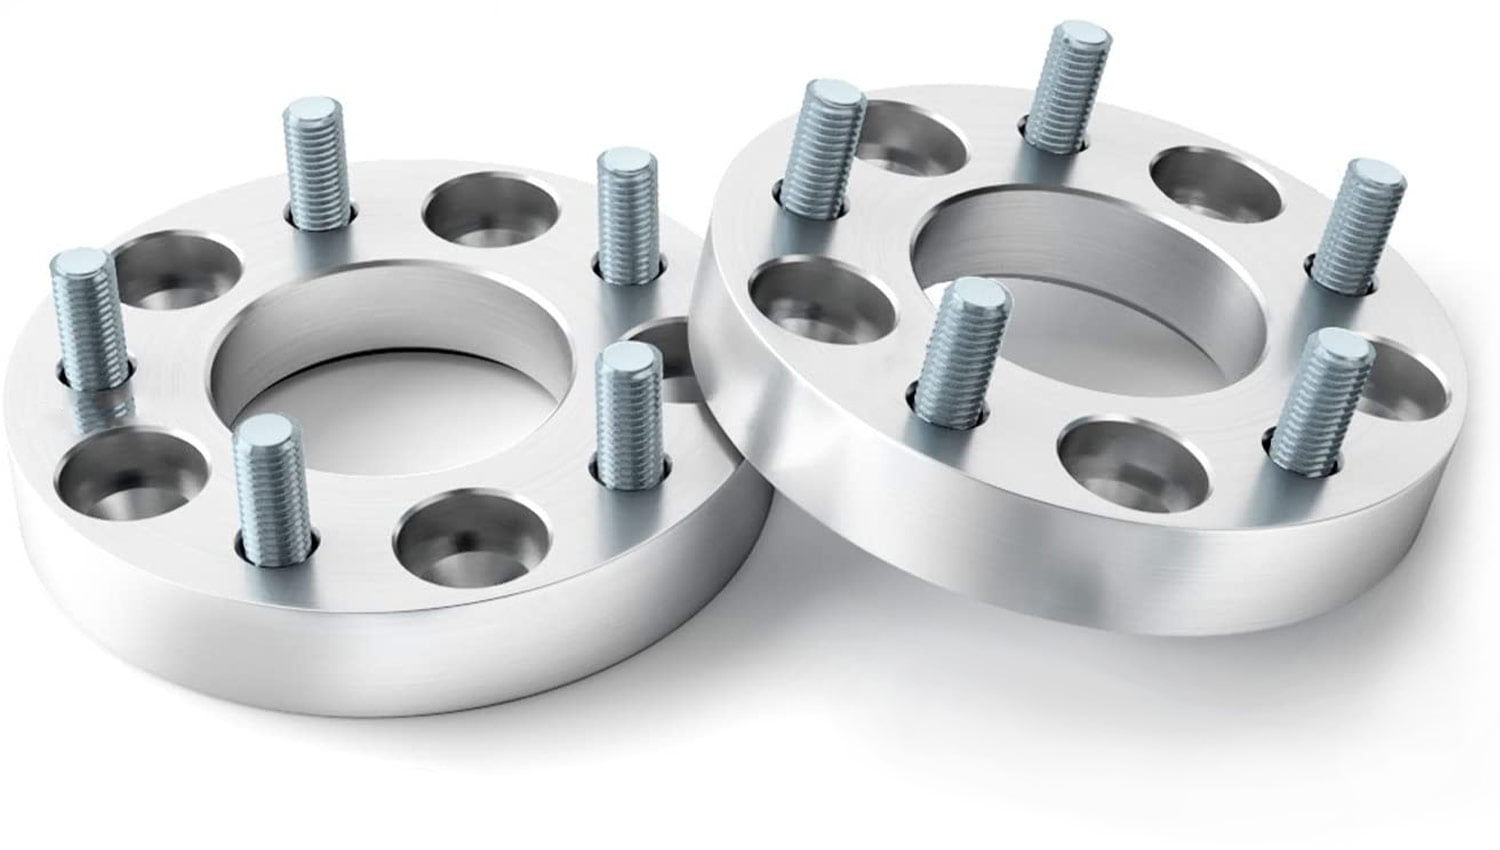 Wheel Spacers - 3 Reasons Why You Should Not Fit Them